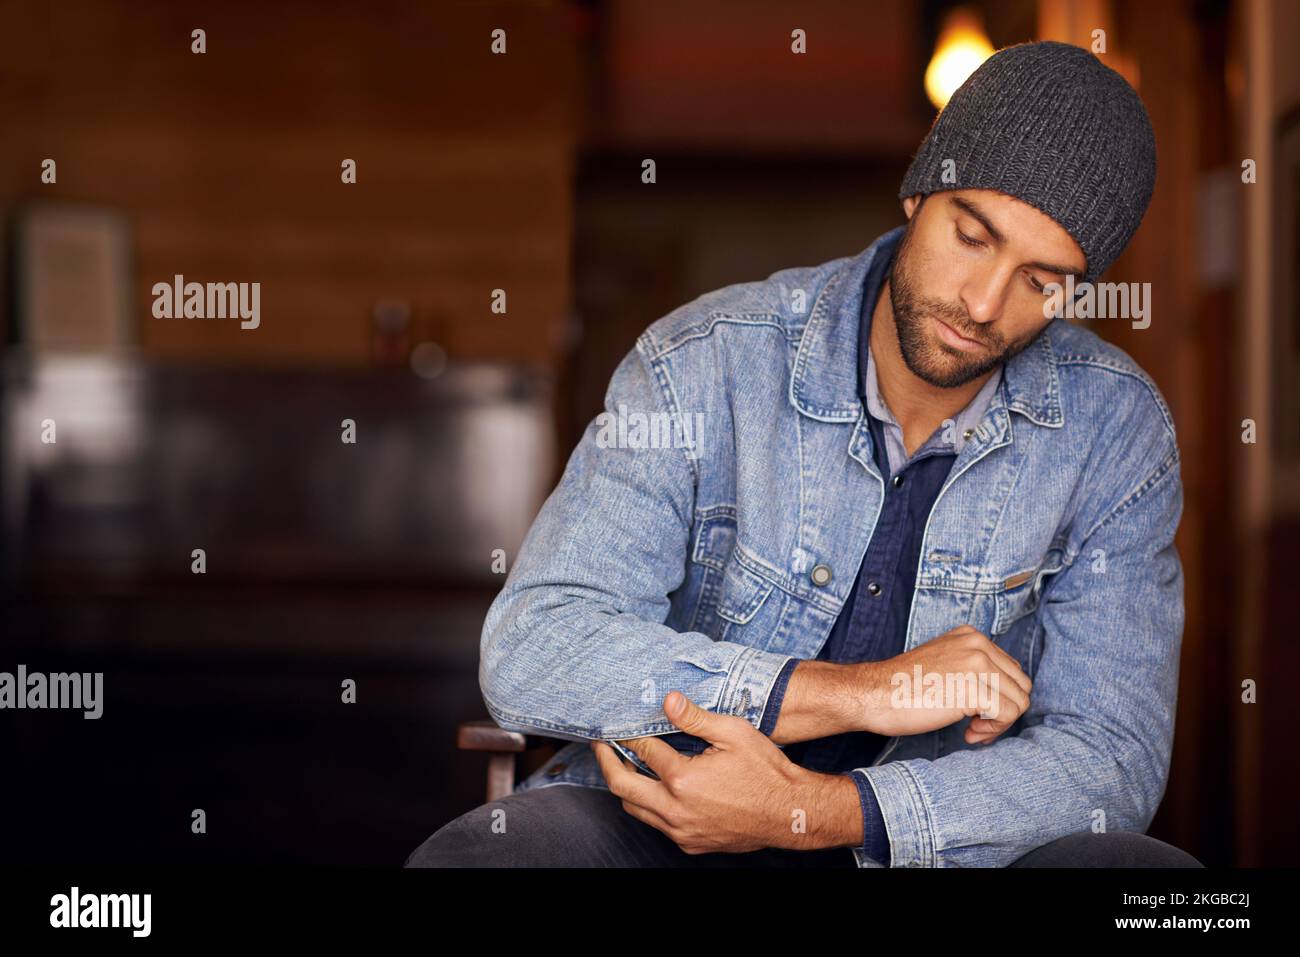 The world is full of guys, be a man. a handsome young man wearing denim clothing. Stock Photo